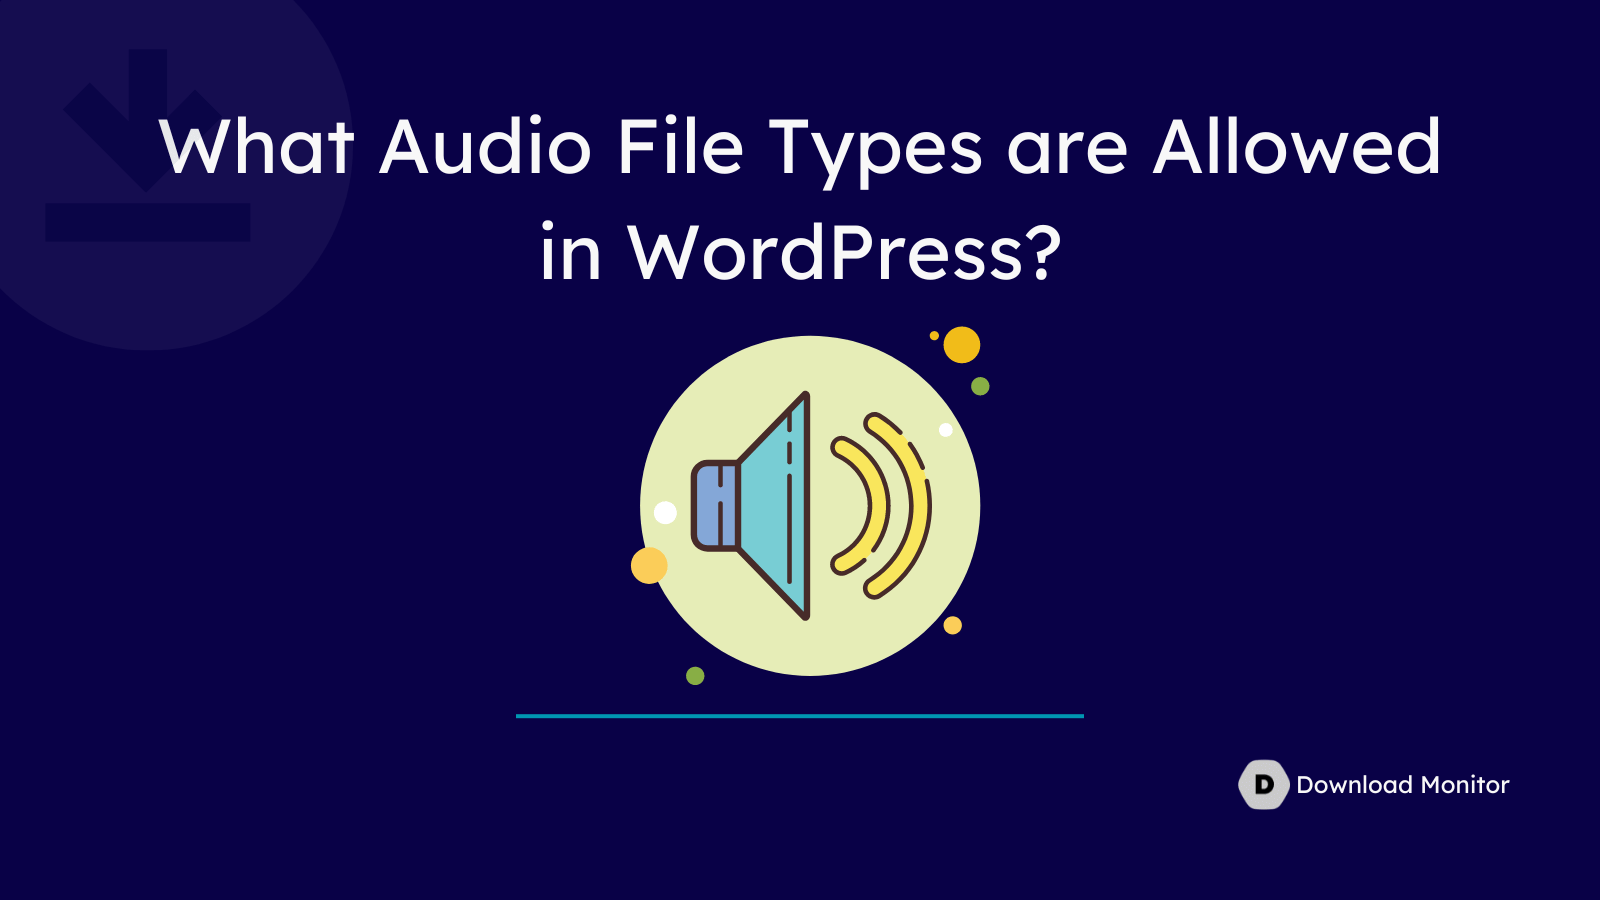 What Audio File Types are Allowed in WordPress- WordPress Allowed File Types